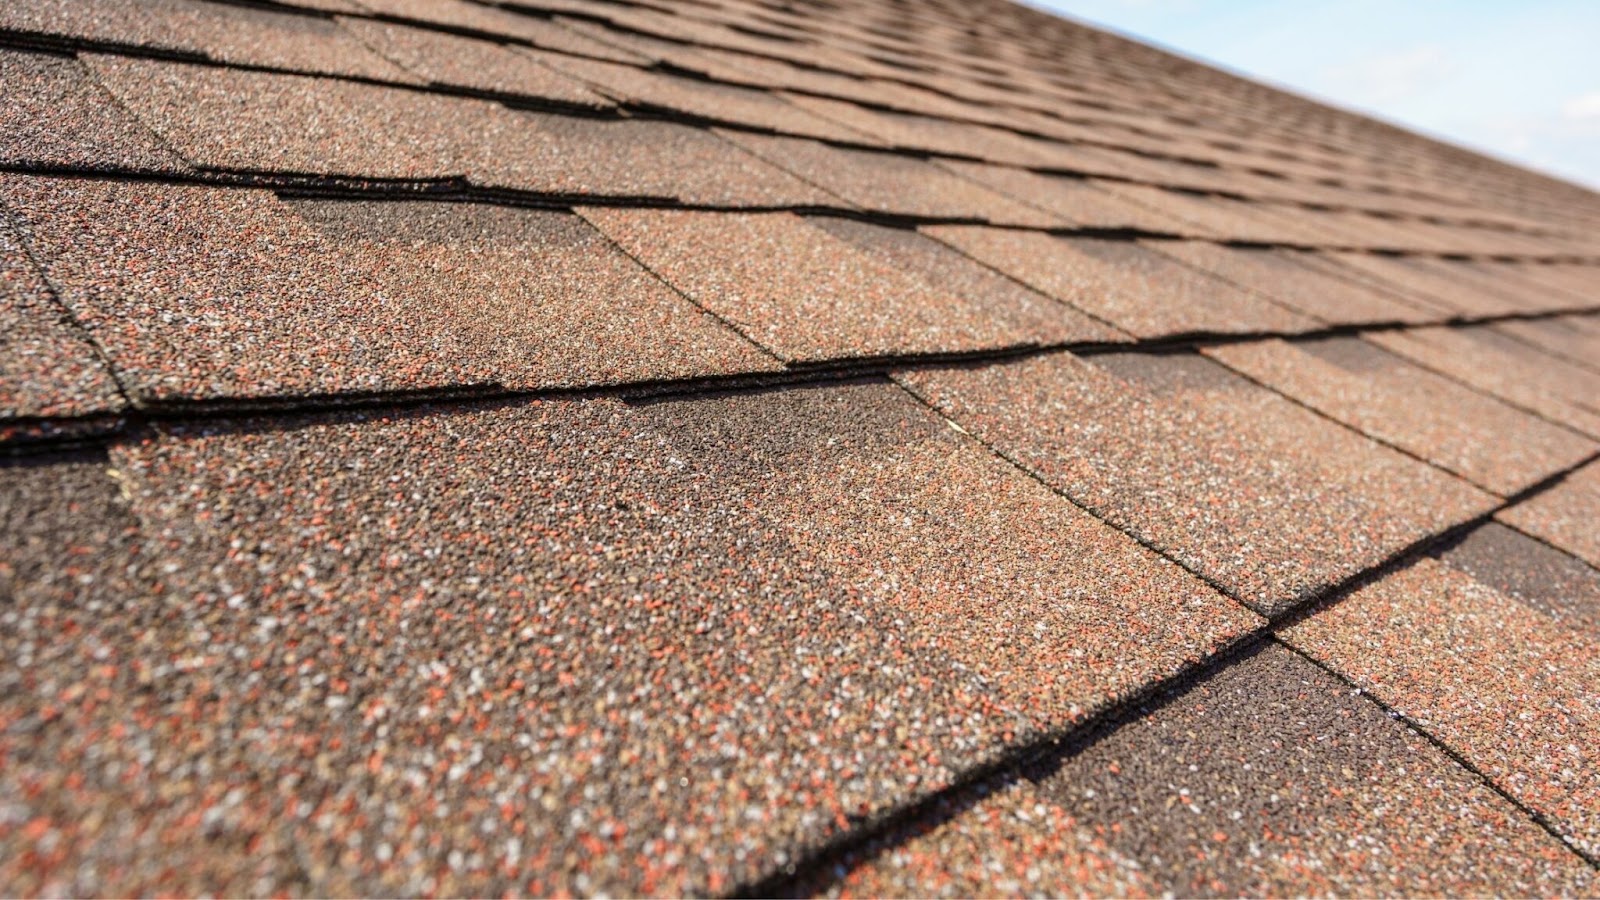 Roof shingles on residential property.